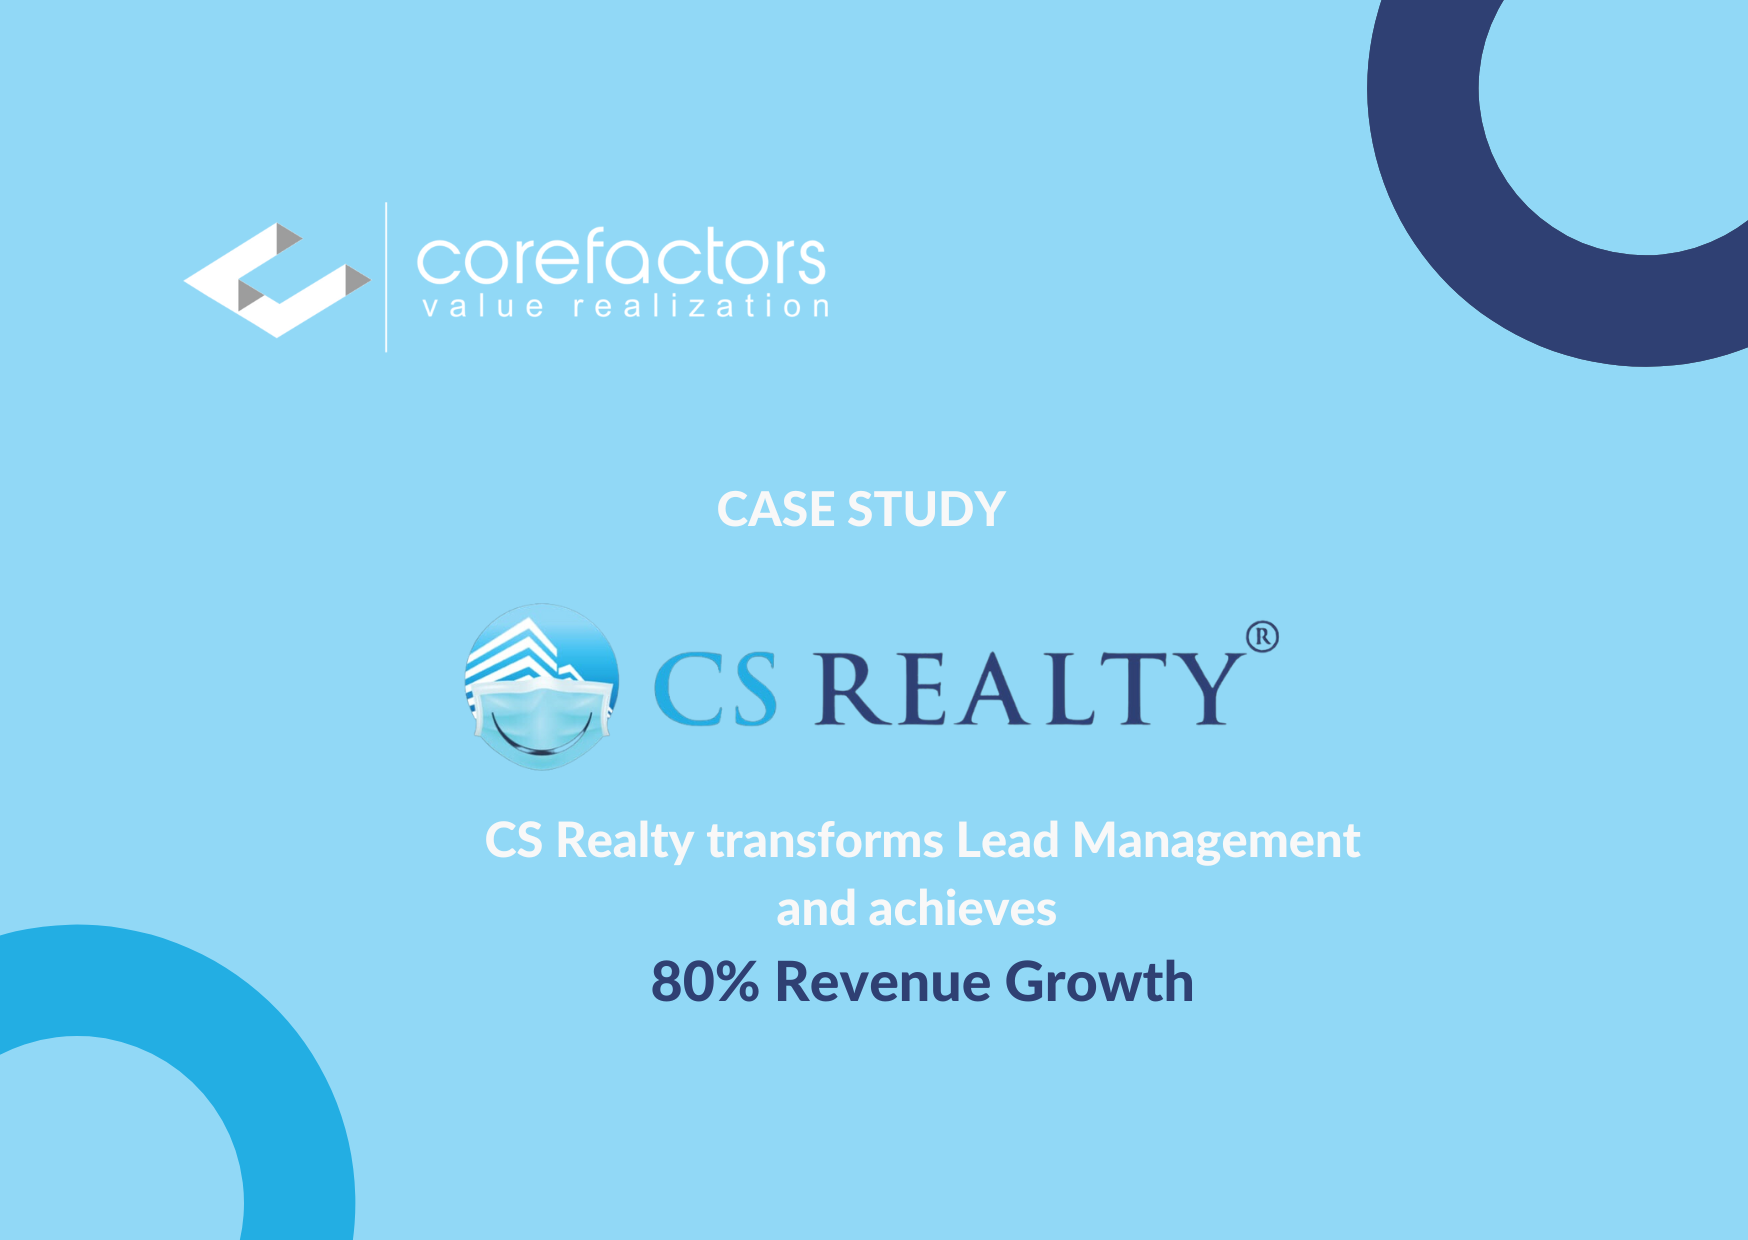 CS Realty transforms Lead Management and achieves 80% Growth with Corefactors AI CRM